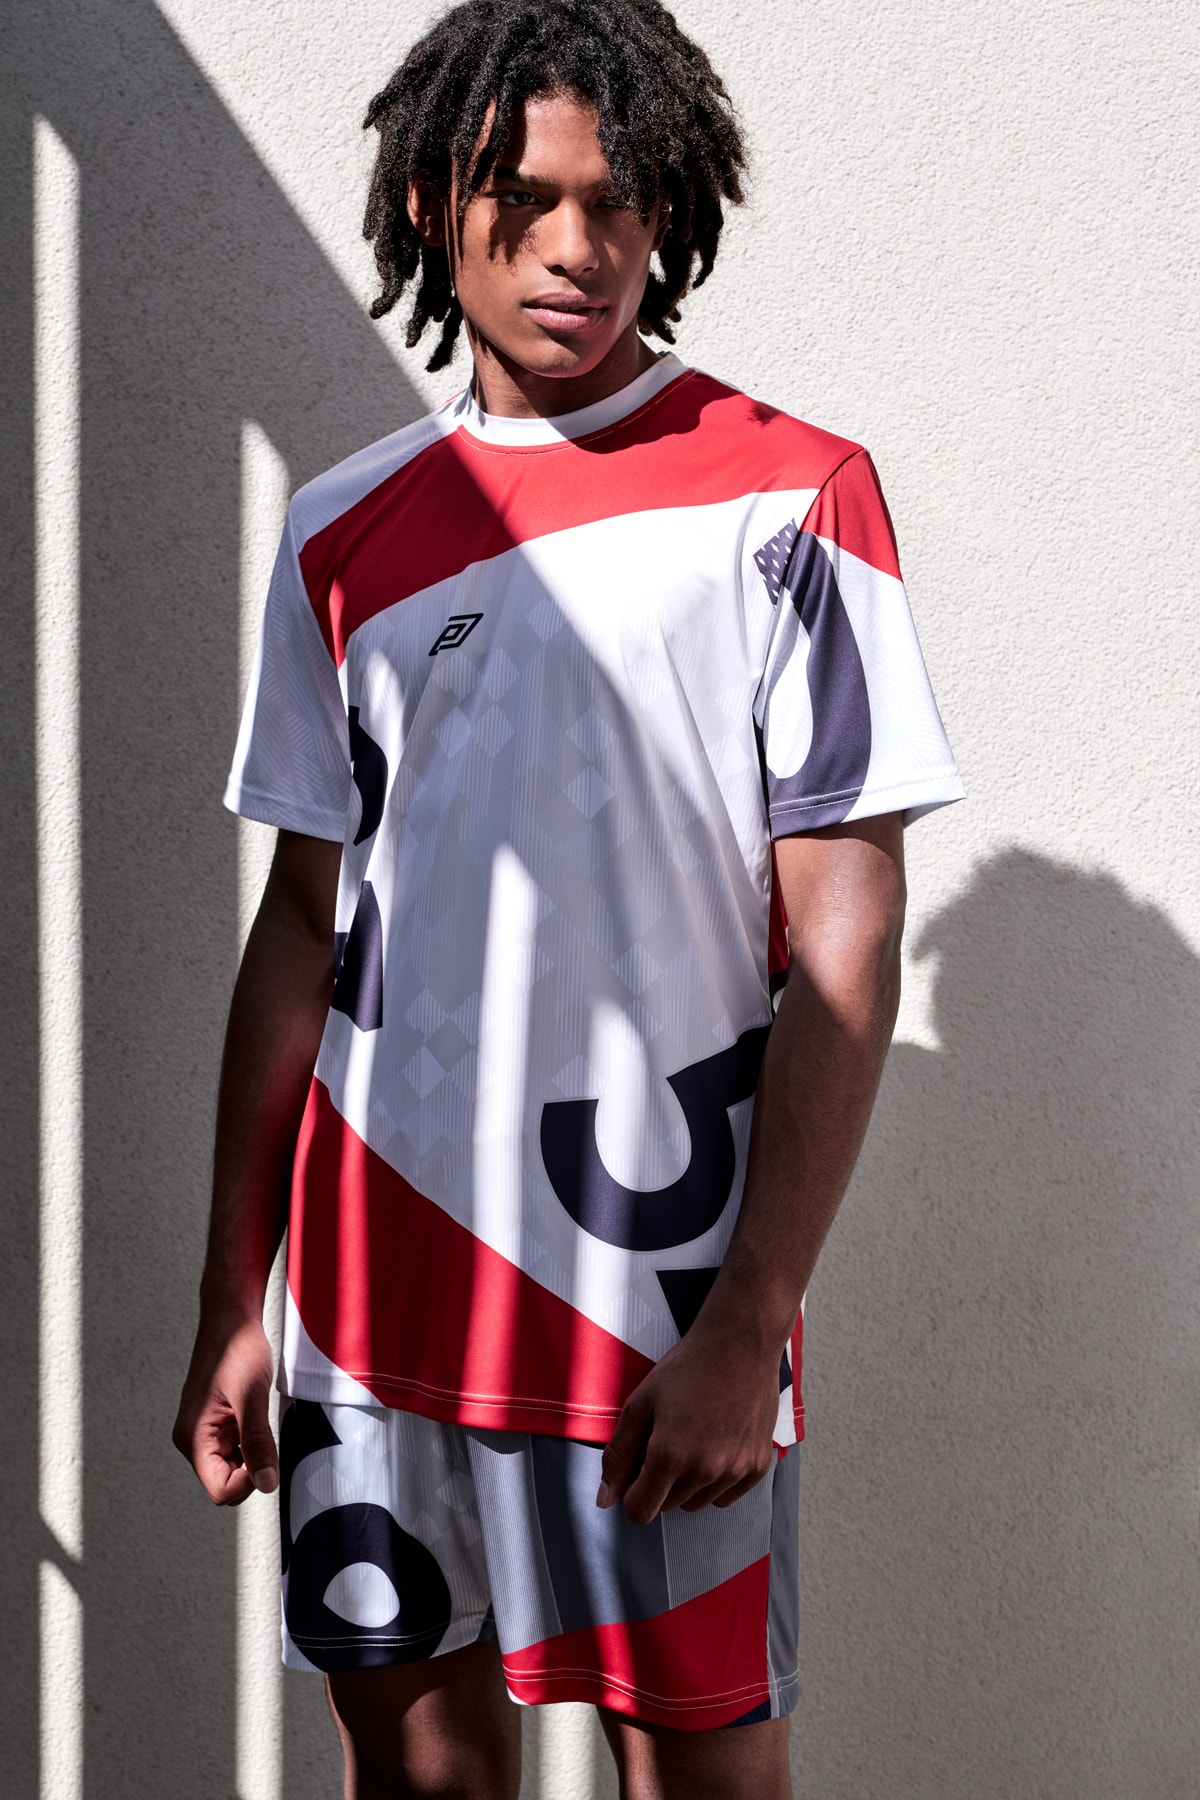 Umbro Christopher Raeburn Spring Summer 2018 Collection Lookbook Collaboration SS18 soccer football uniform jersey remade reduced recycled english deconstruct kit may 31